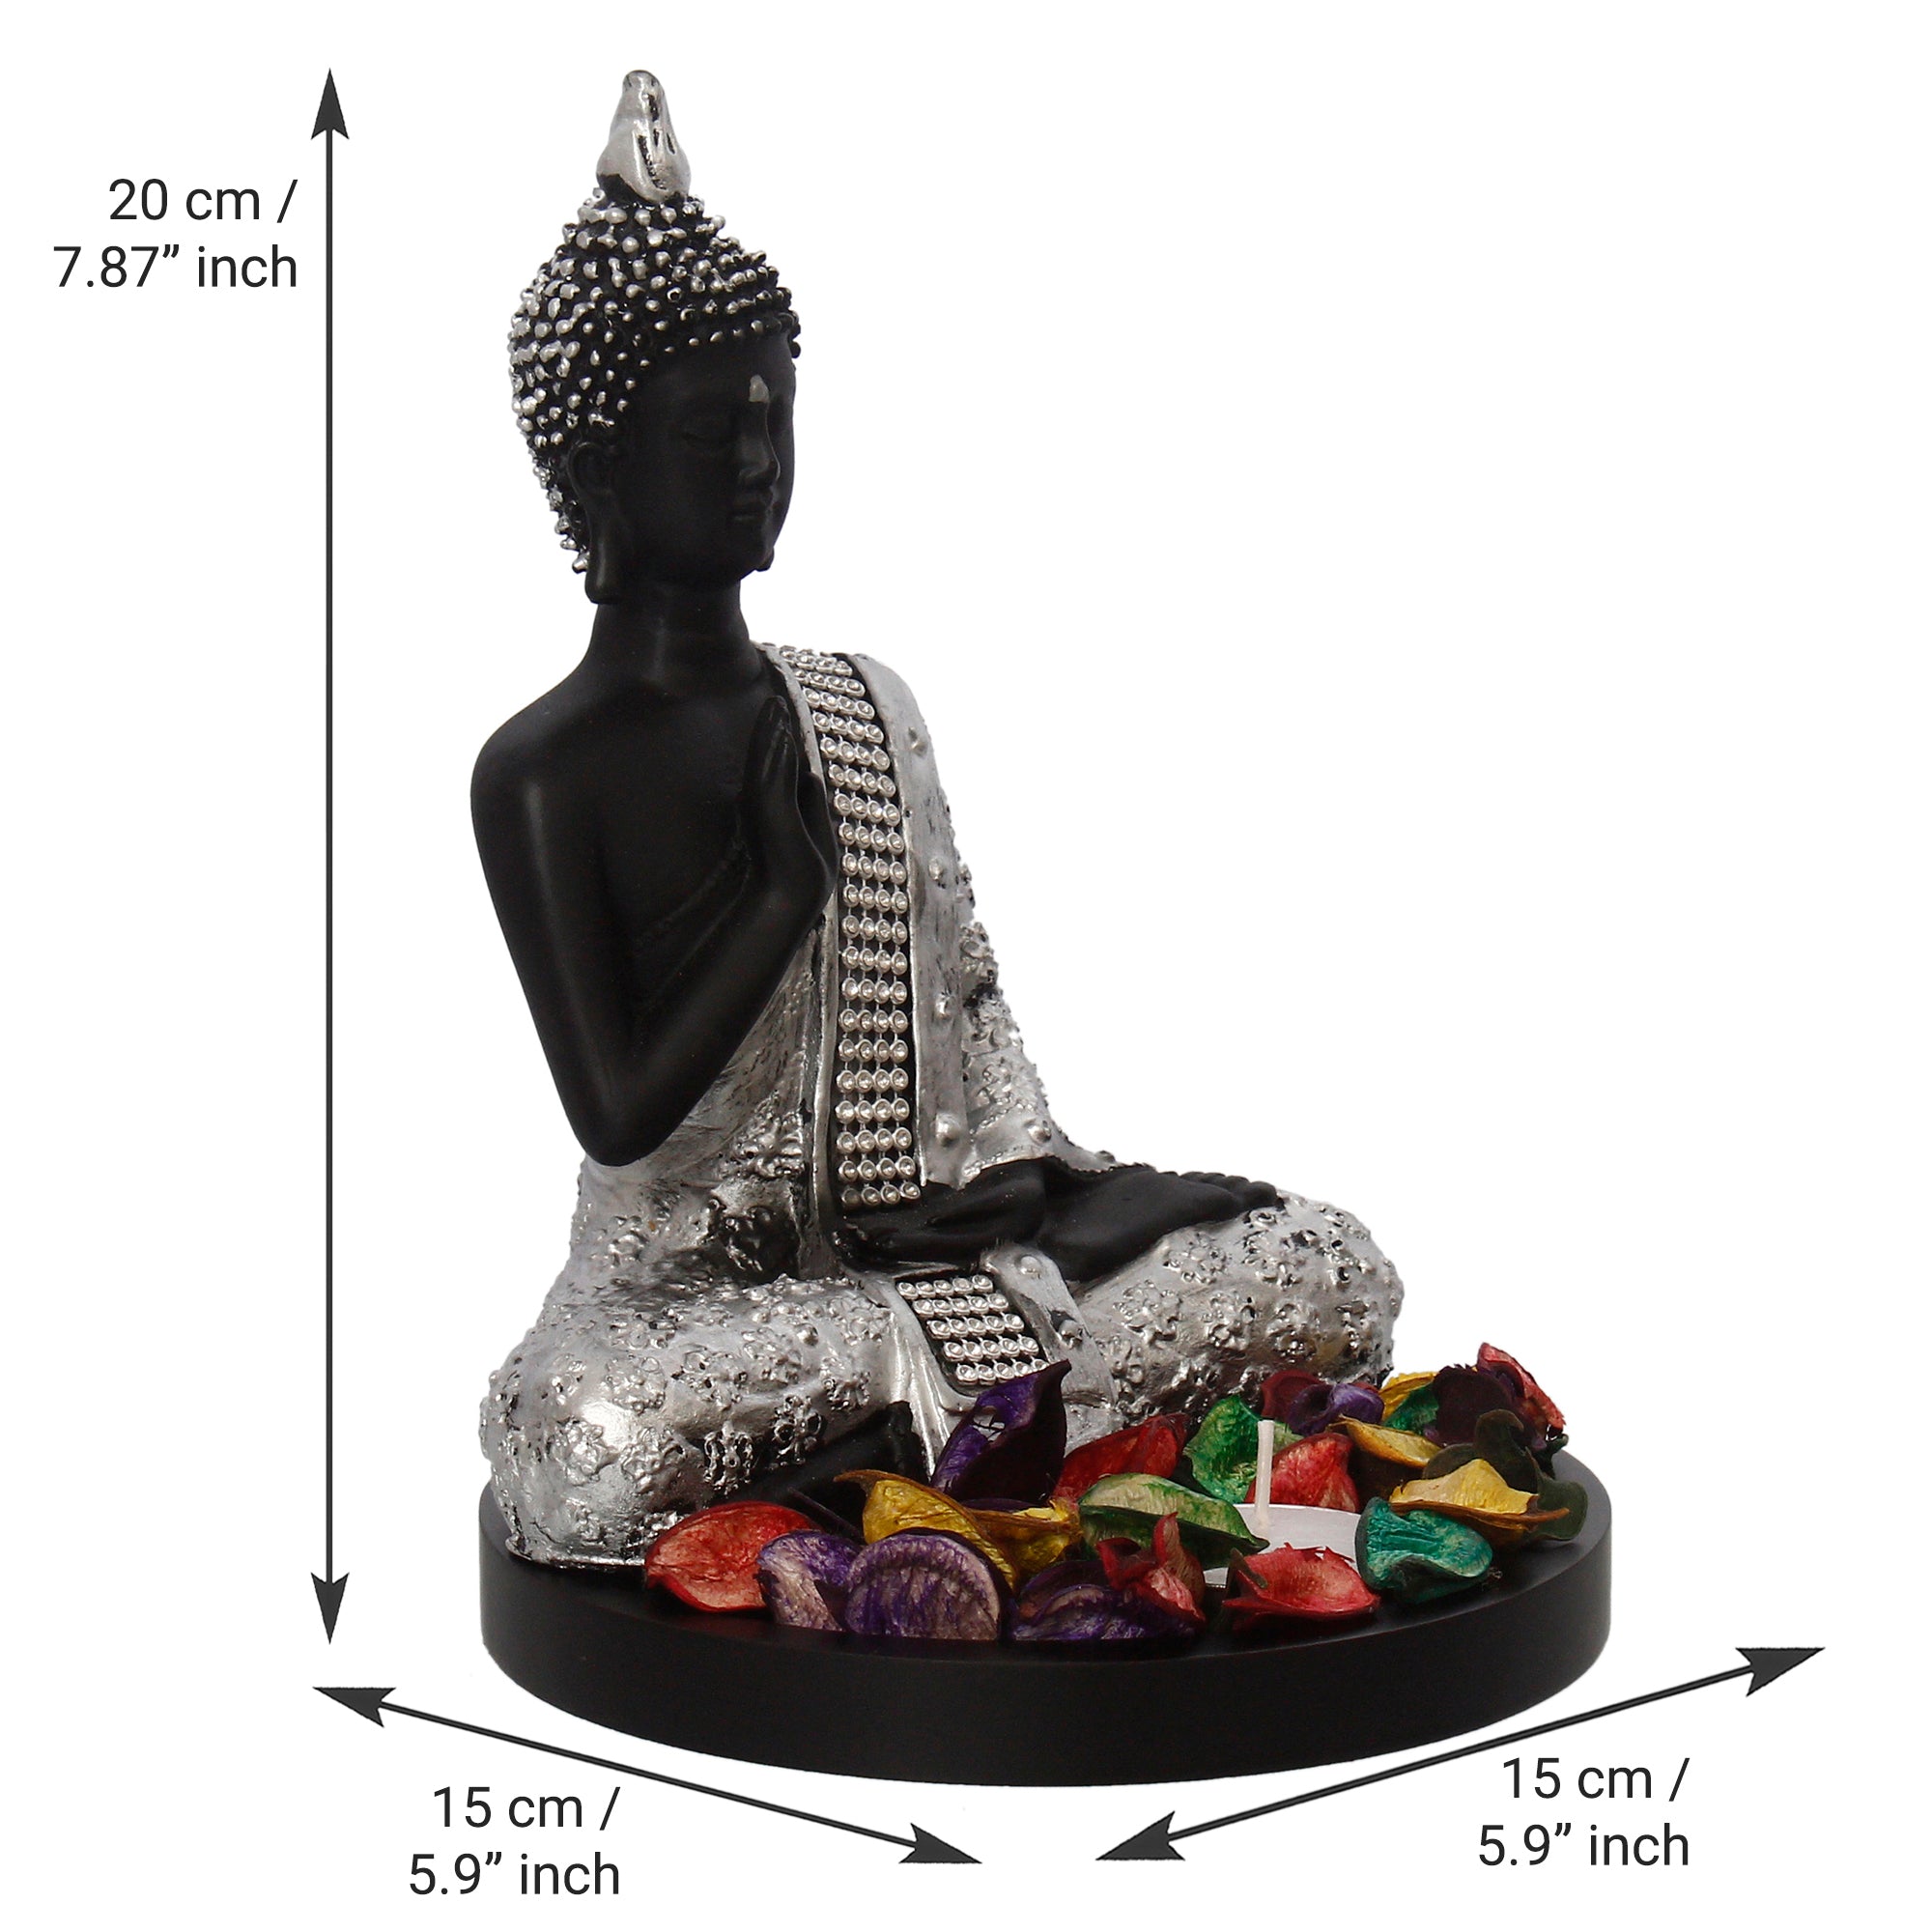 Polyresin Black and Silver Handcrafted Meditating Blessing Buddha Statue with Wooden Base, Fragranced Petals and Tealight 3